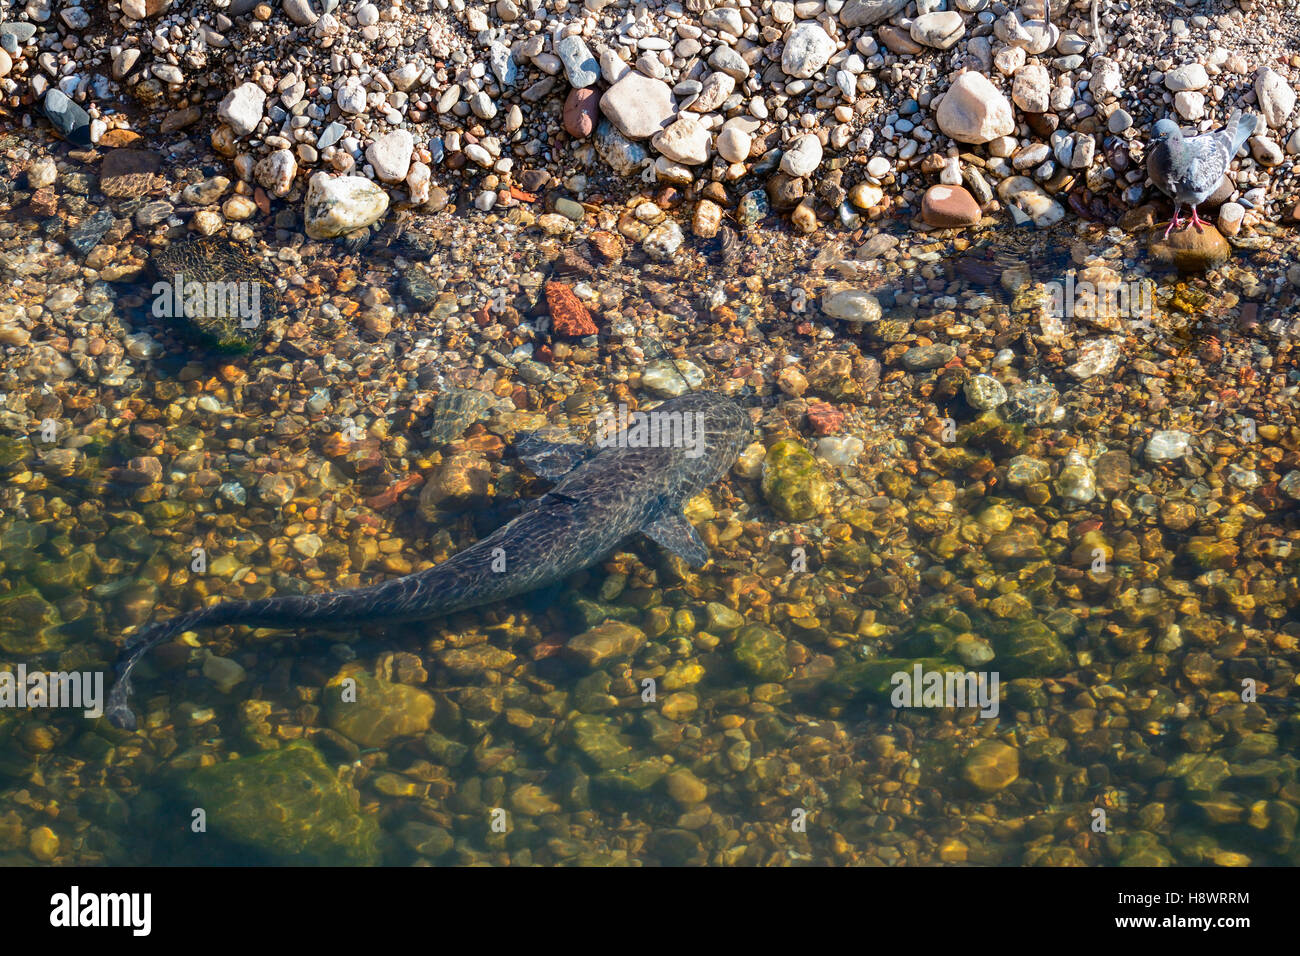 Wels Catfish (Silurus glanis) very close to the edge, just before